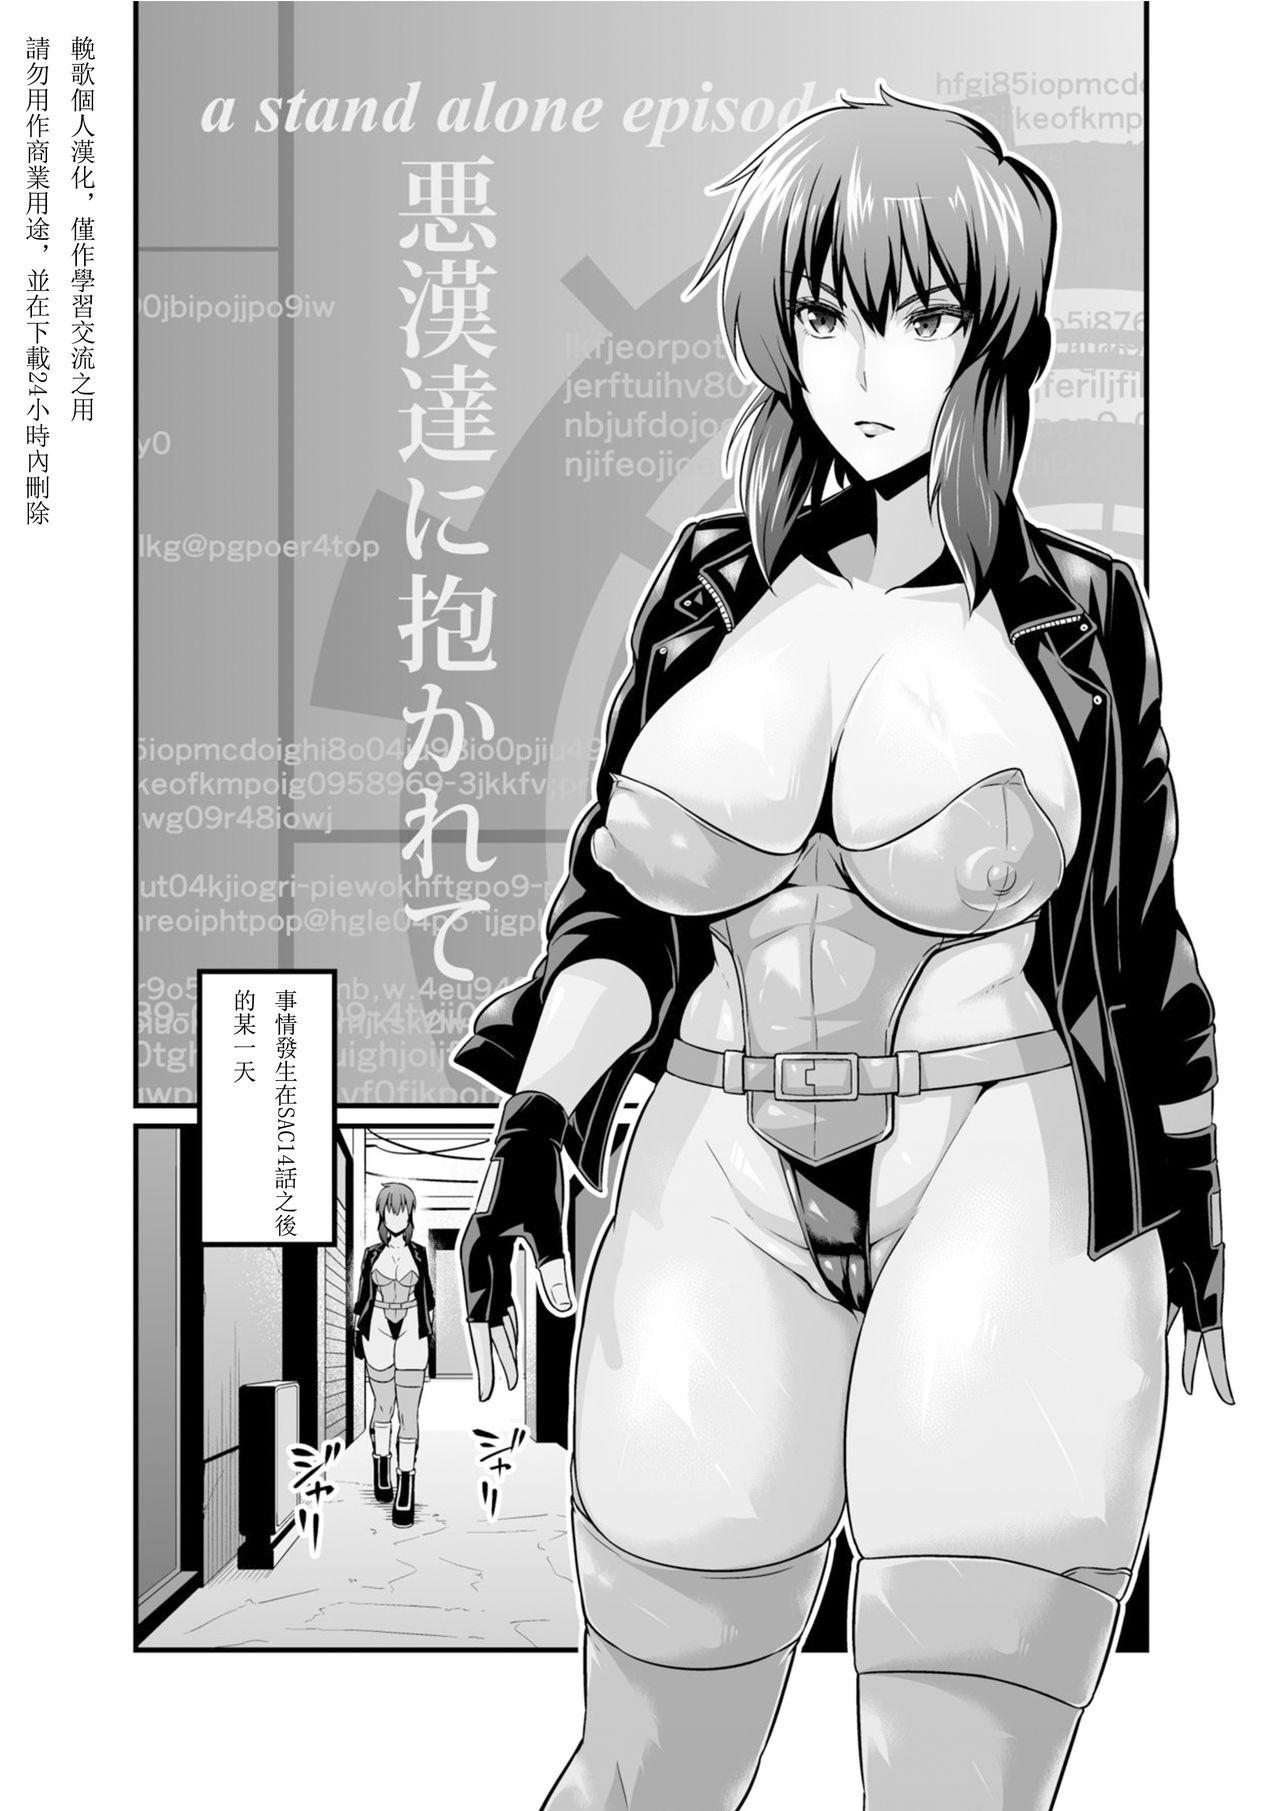 Straight SSS 14.5 - Ghost in the shell Free 18 Year Old Porn - Page 2